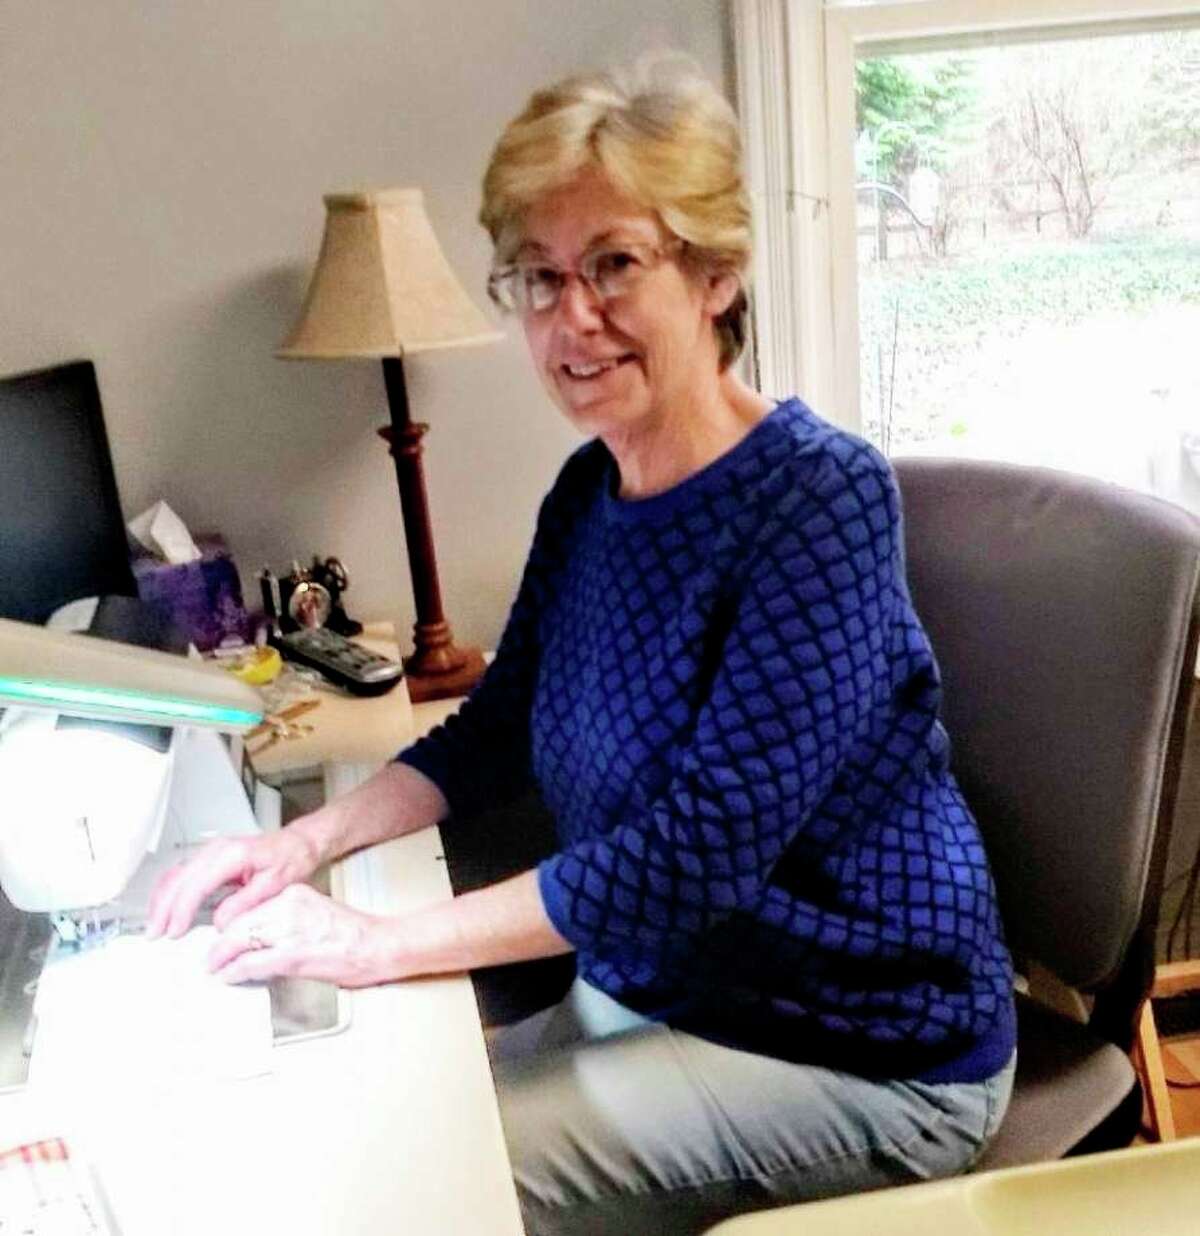 Nancy Wallace was one of many local residents who helped make free face masks for people in need during the beginning of the COVID-19 pandemic before masks were widely available in stores. (Courtesy photo)